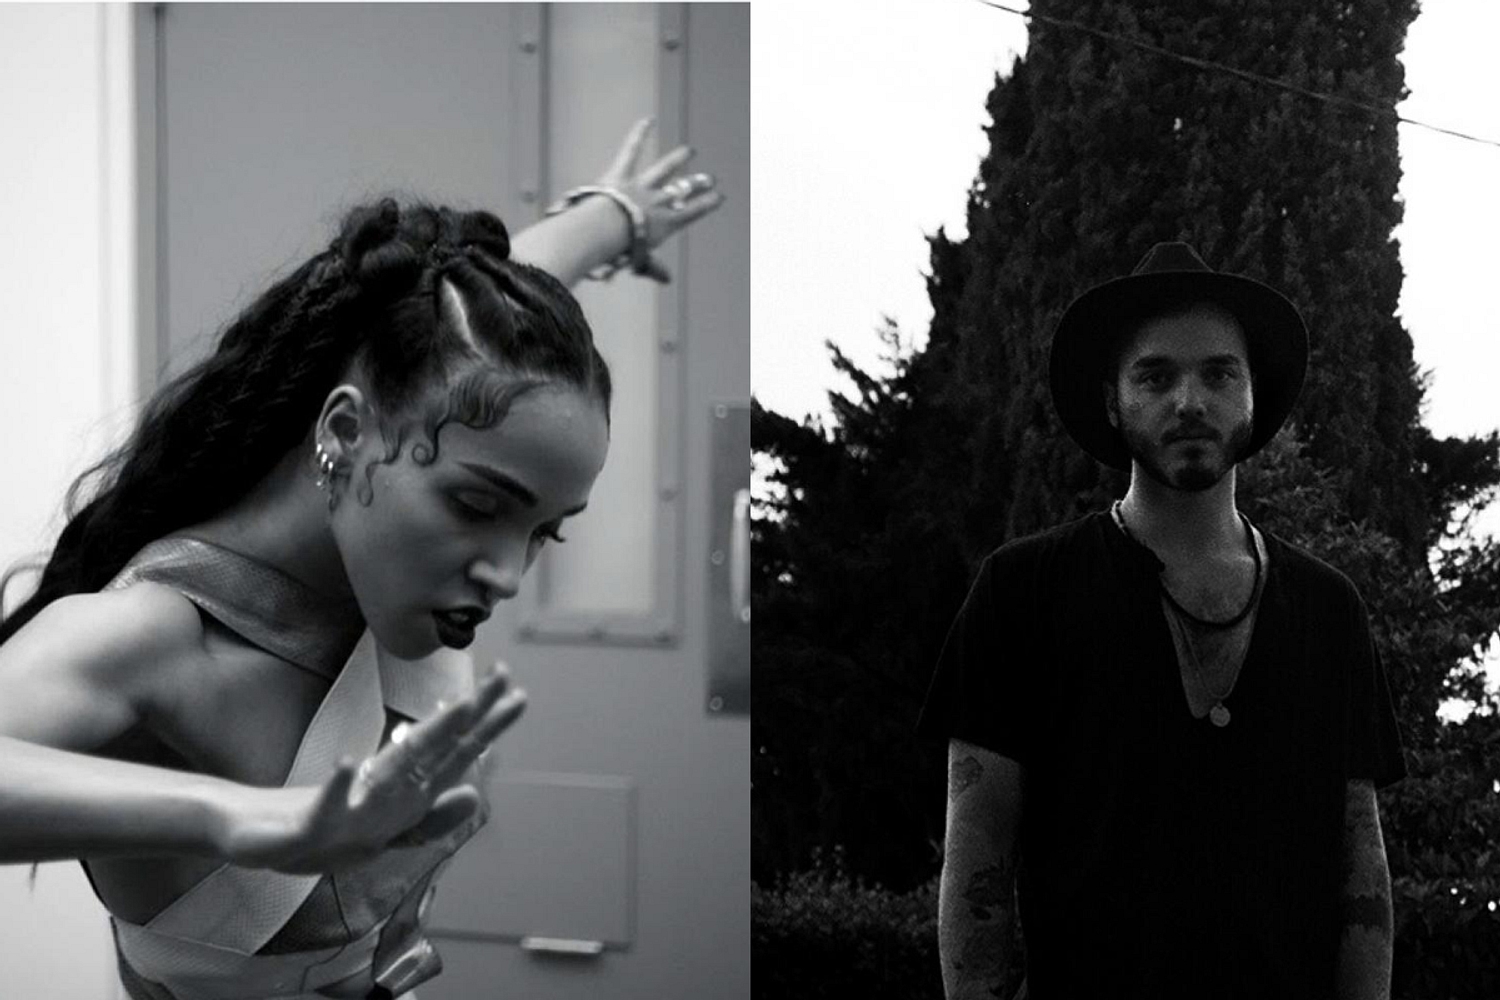 BOOTS talks toilet samples and open-mindedness on FKA twigs’ ‘M3LL155X’ EP